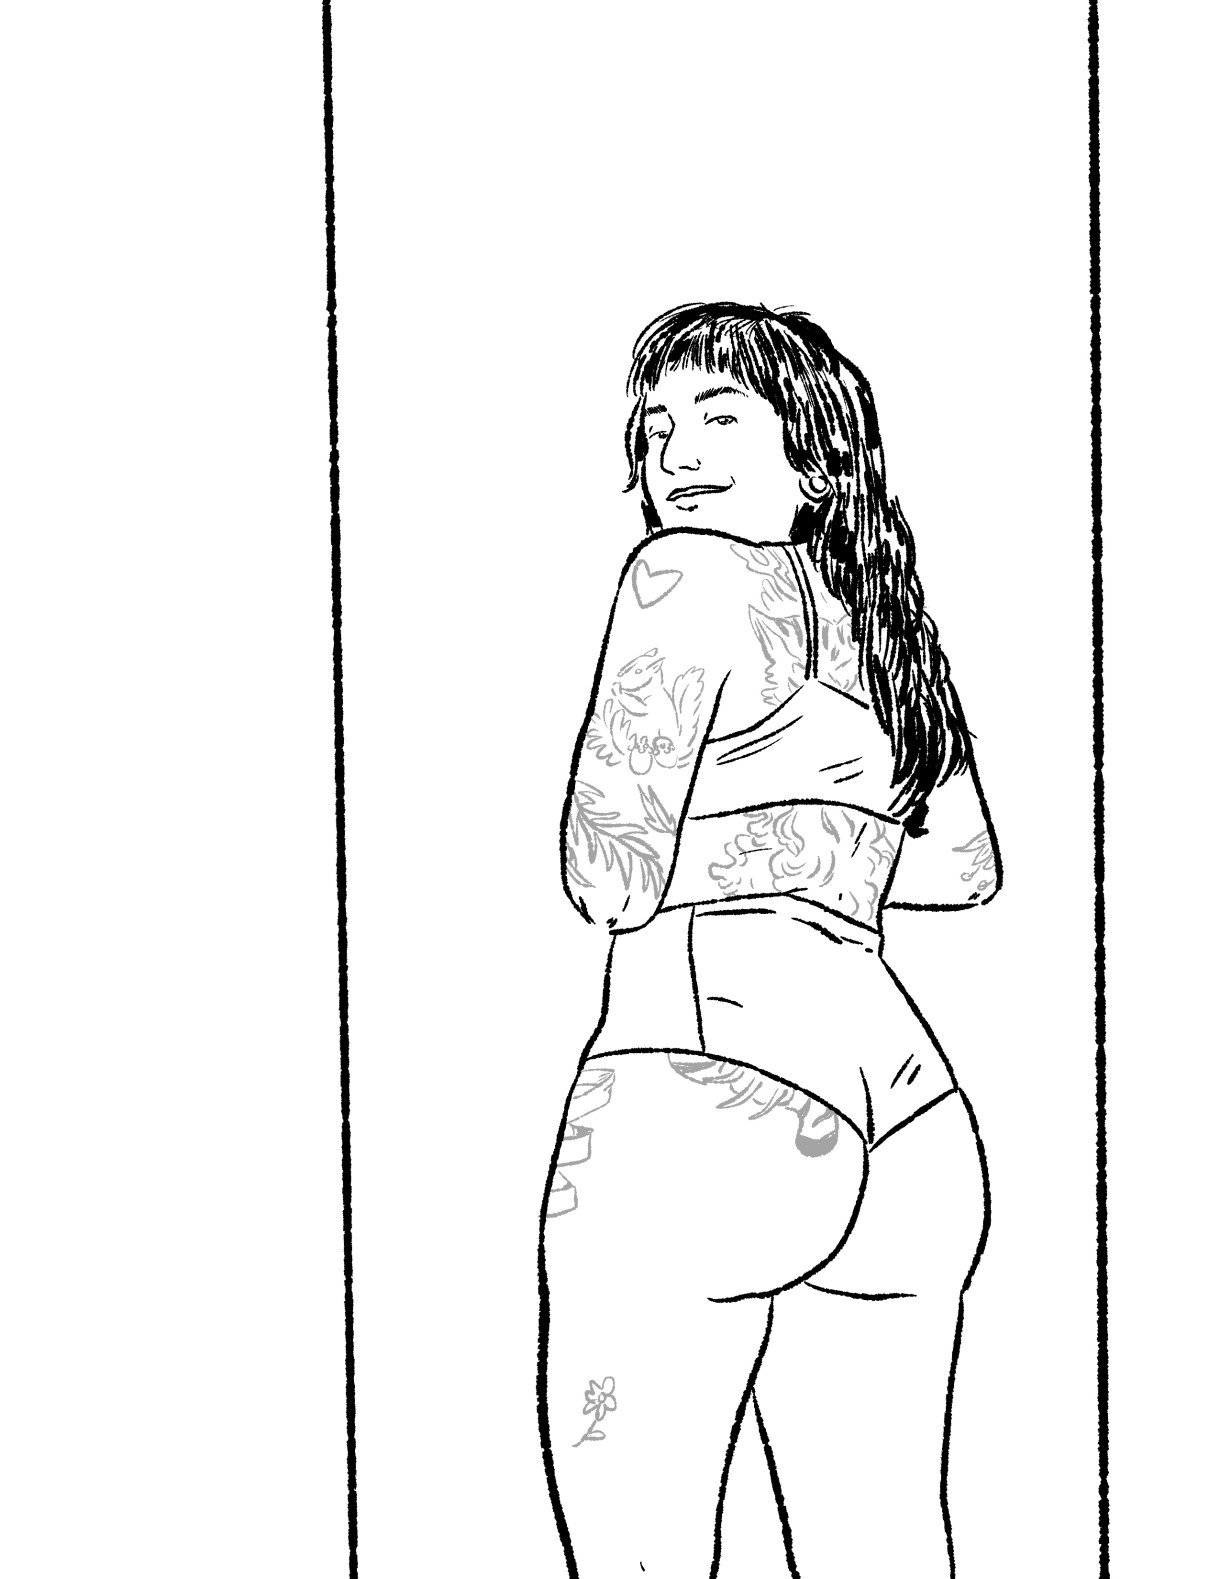 A long-haired person with tattoos and wearing lingerie that shows off their butt looks over their shoulder at you.